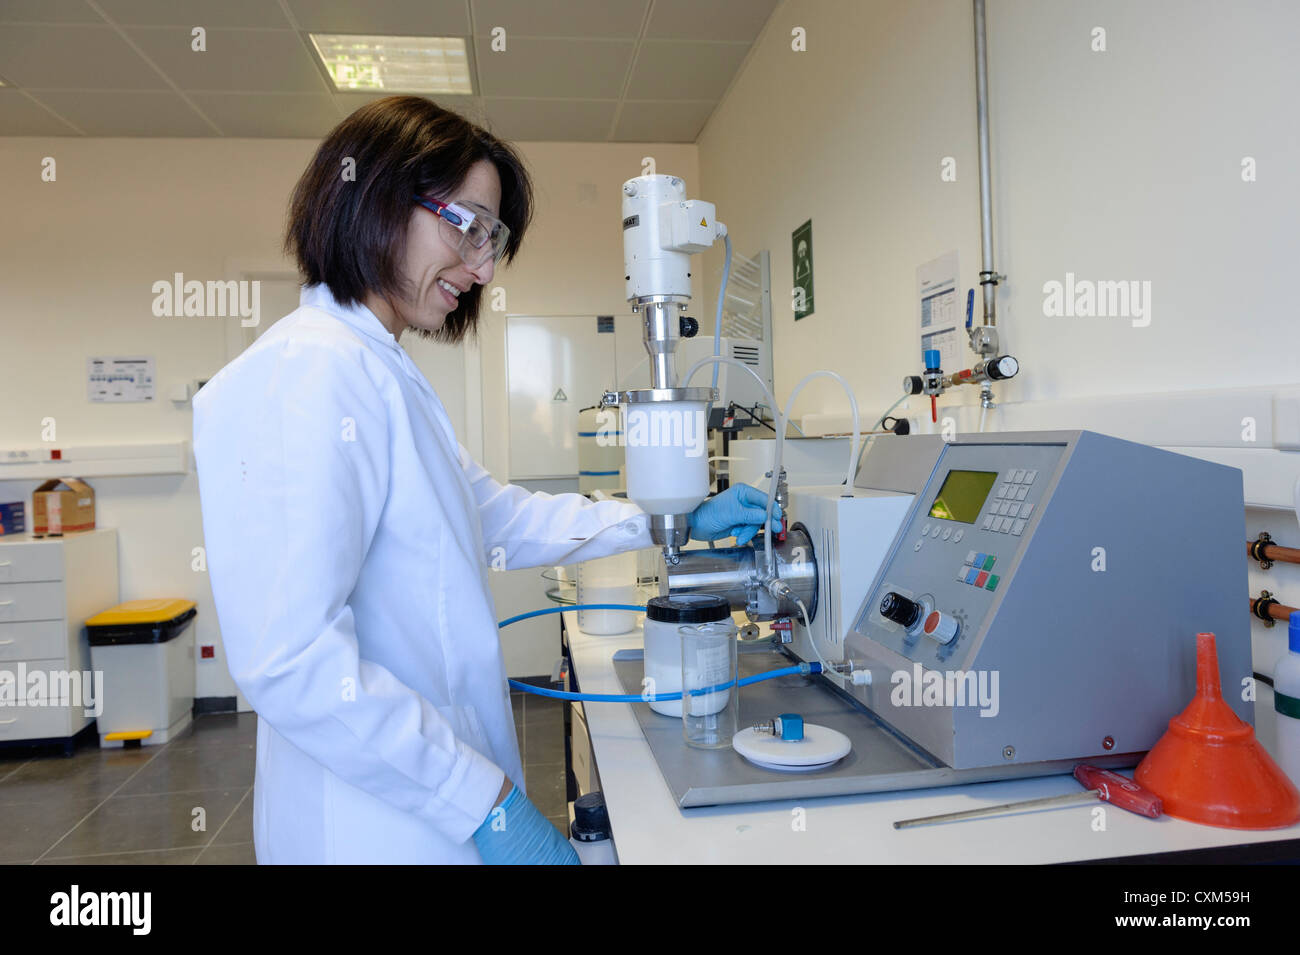 Scientist working in nano technology lab Banque D'Images